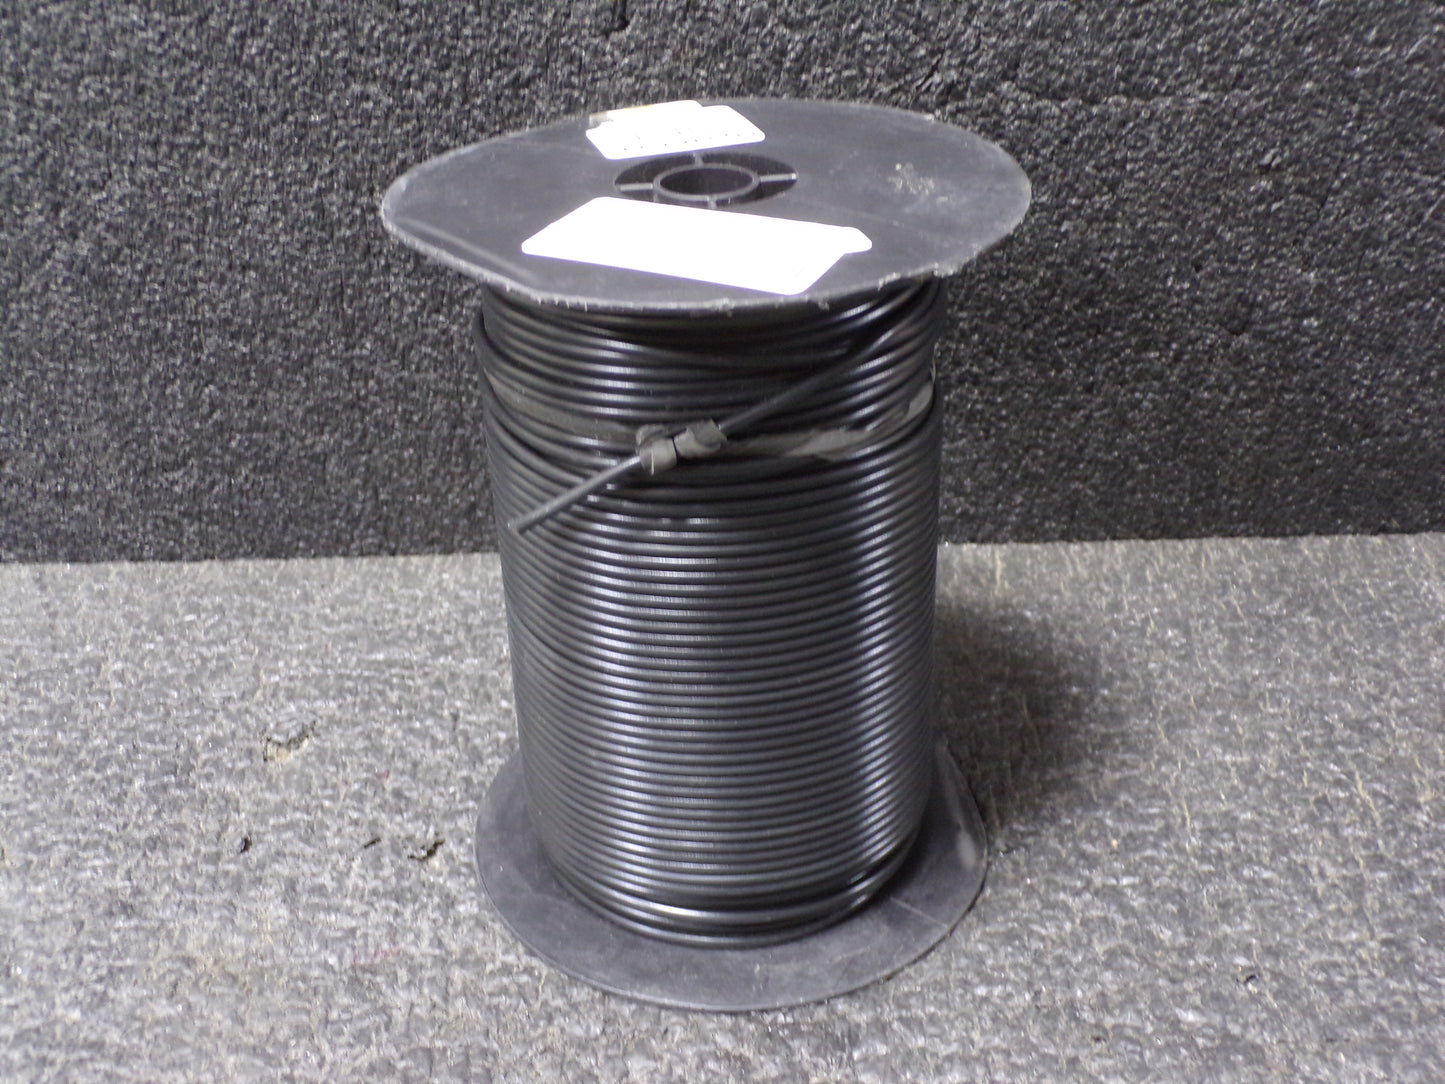 BATTERY DOCTOR Primary Automotive Wire, Number of Conductors 1, 12 AWG, PVC, 500 ft, Black (CR00389-WT12)